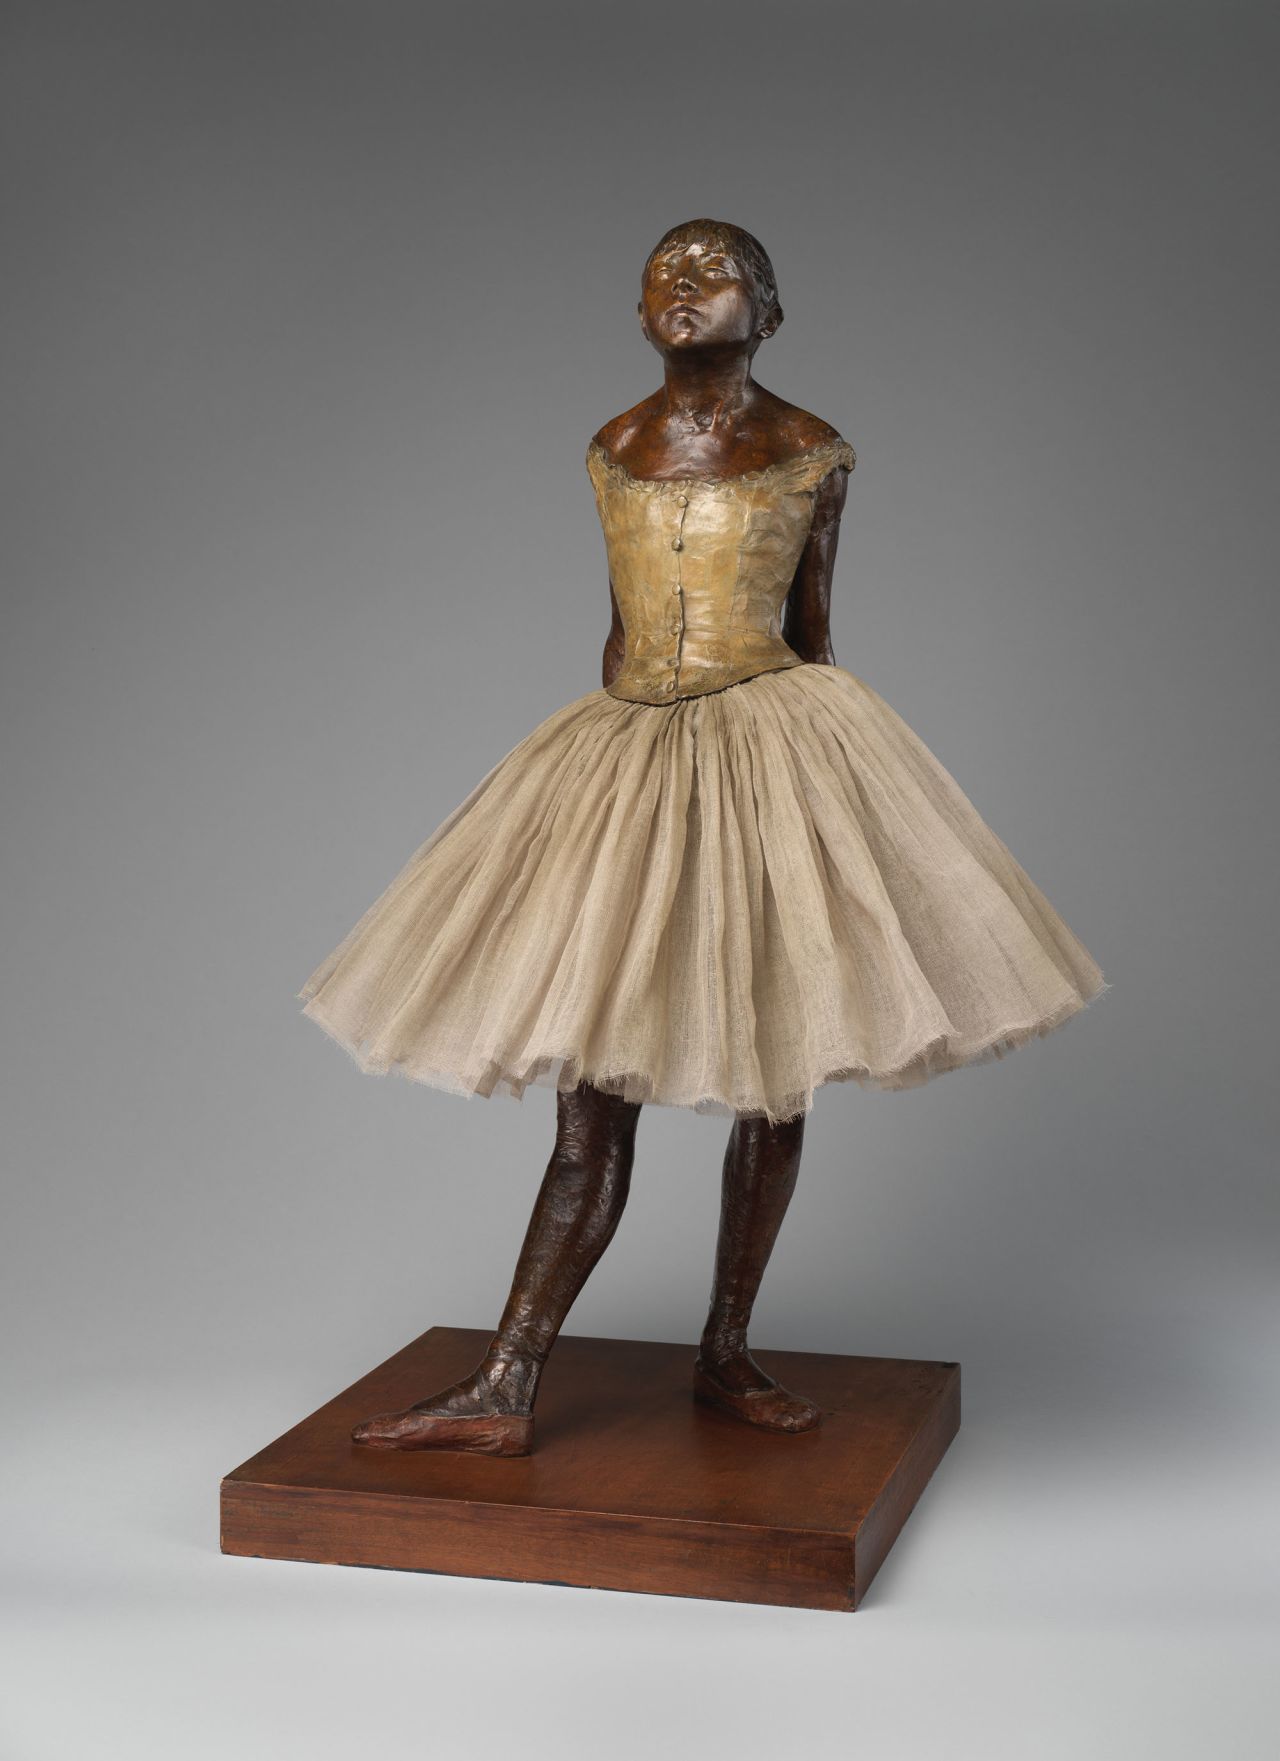 "Little Dancer Aged Fourteen" caused a scandal when Degas debuted it.